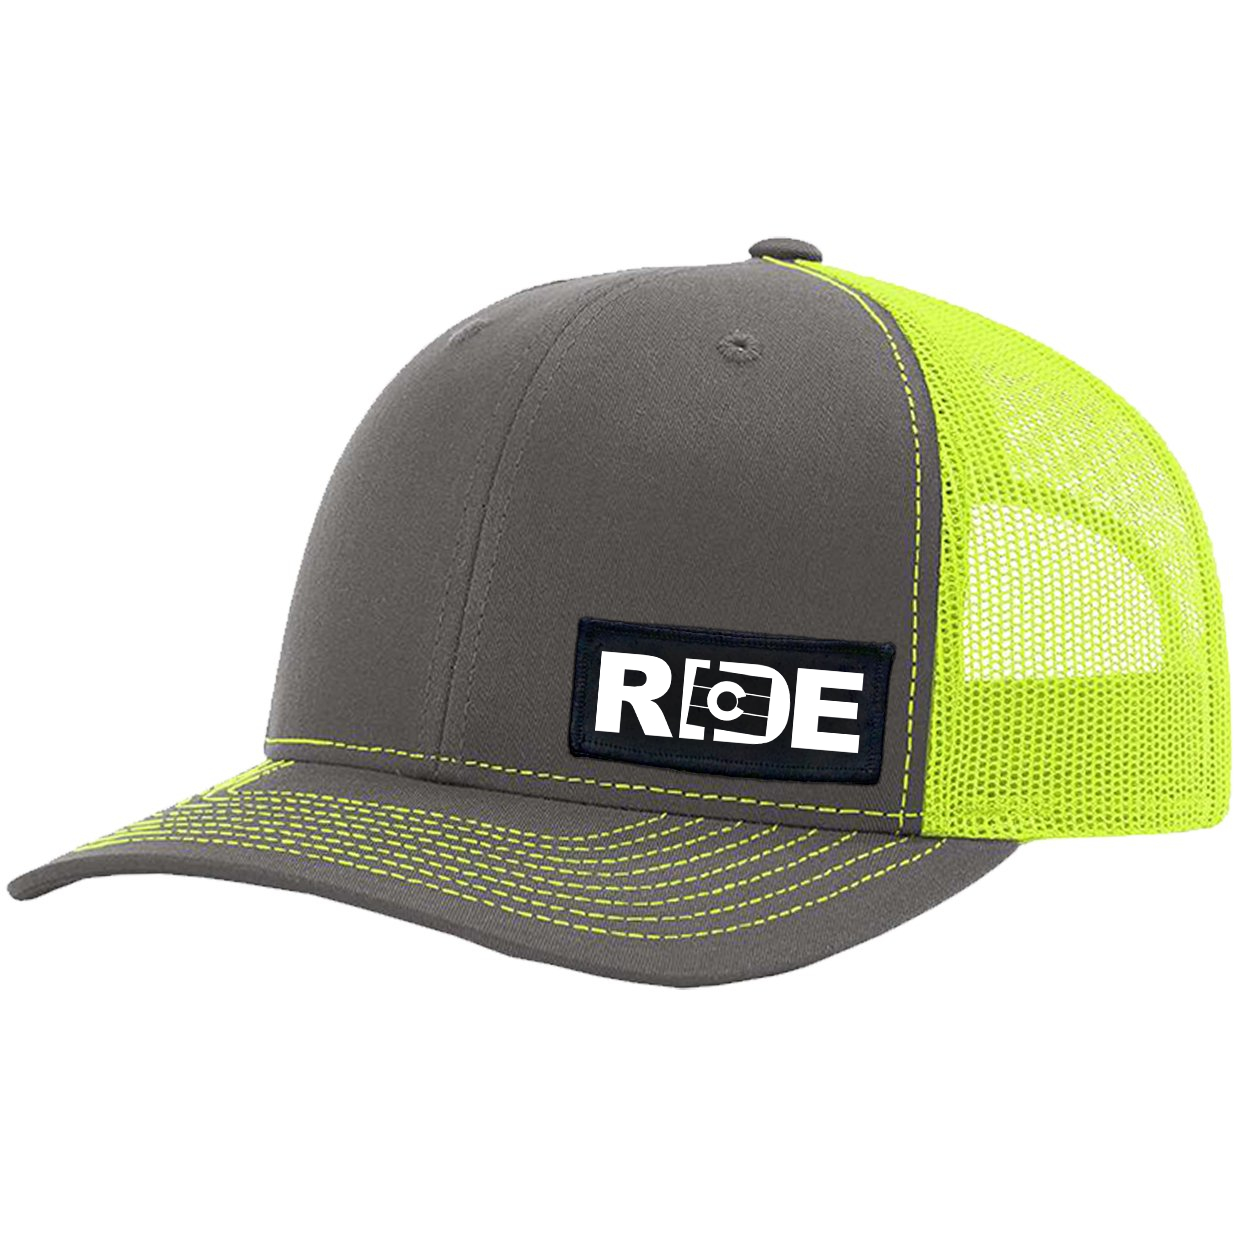 Ride Colorado Night Out Woven Patch Snapback Trucker Hat Charcoal/Neon Yellow (White Logo)